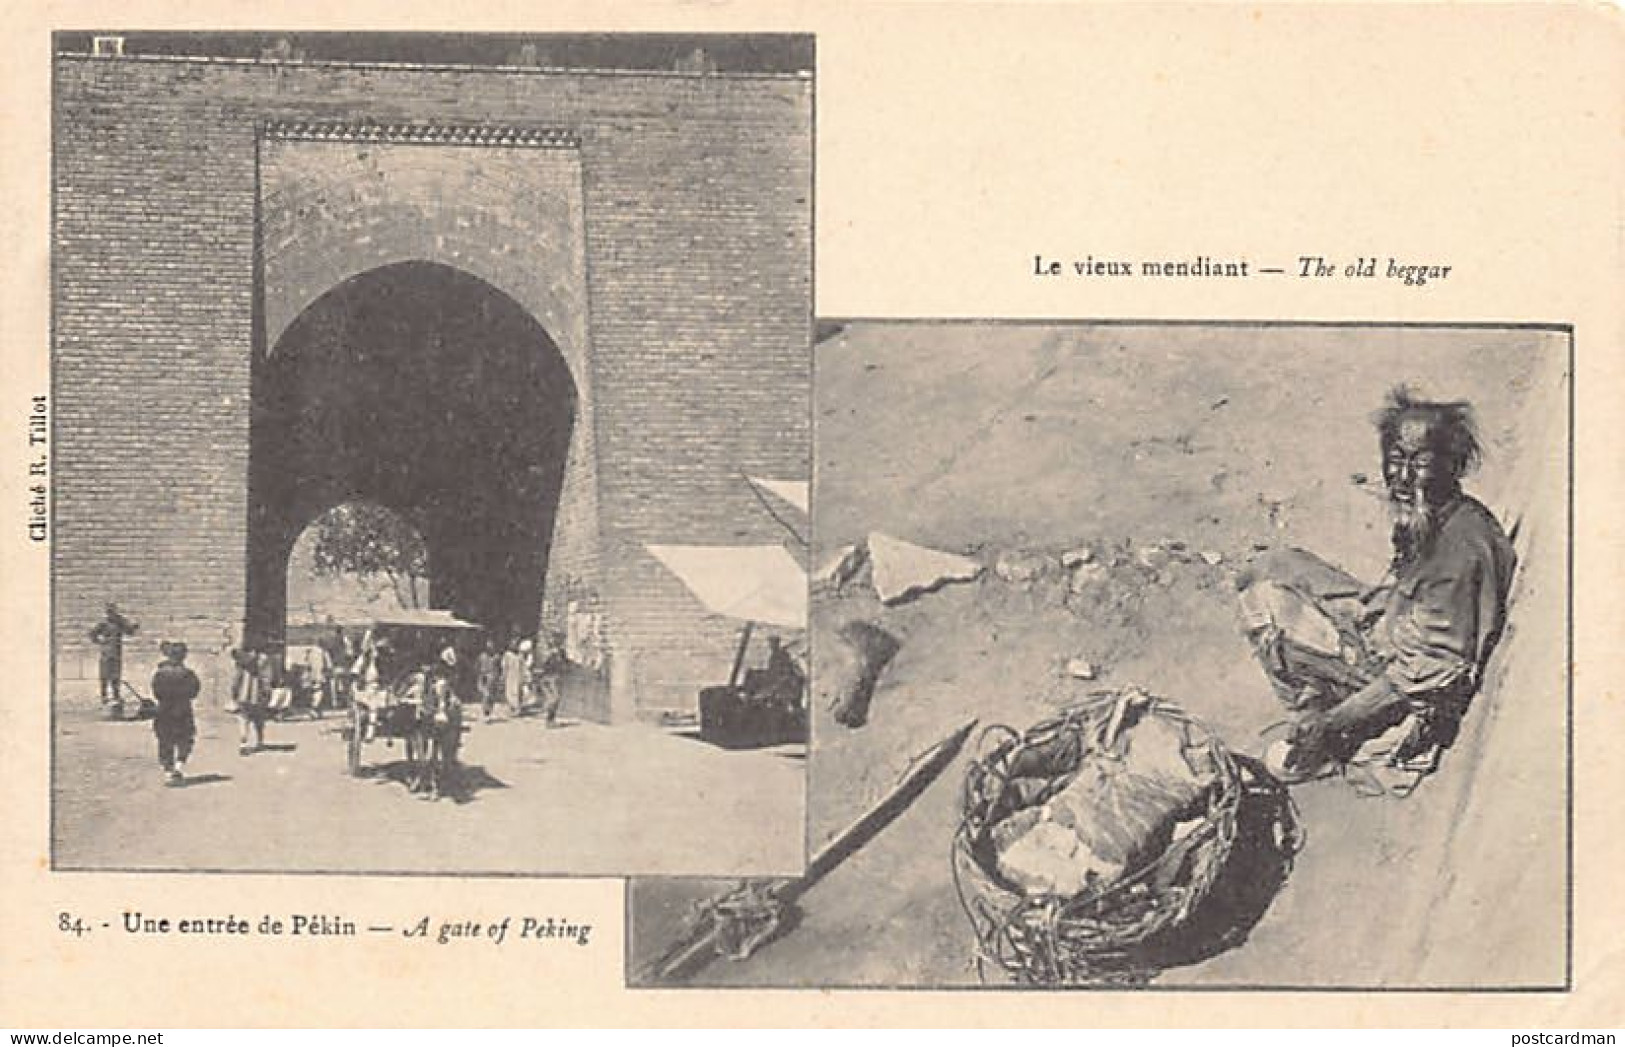 China - BEIJING - A Gate - The Old Beggar - Publ. R. Tillot 84 - China